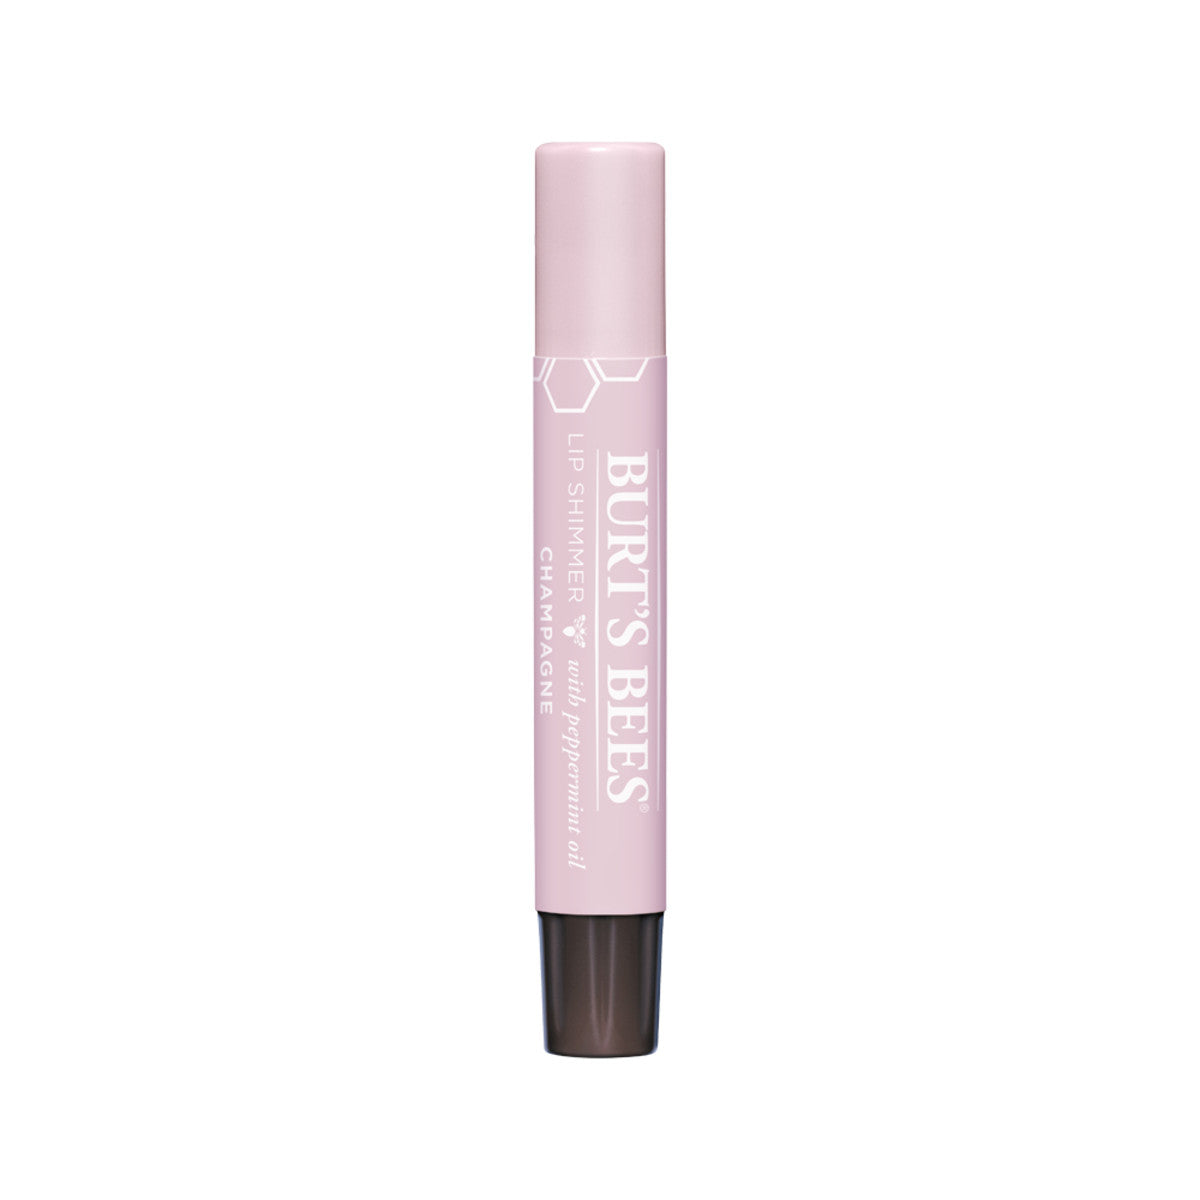 Burts Bees - Lip Shimmer Champagne